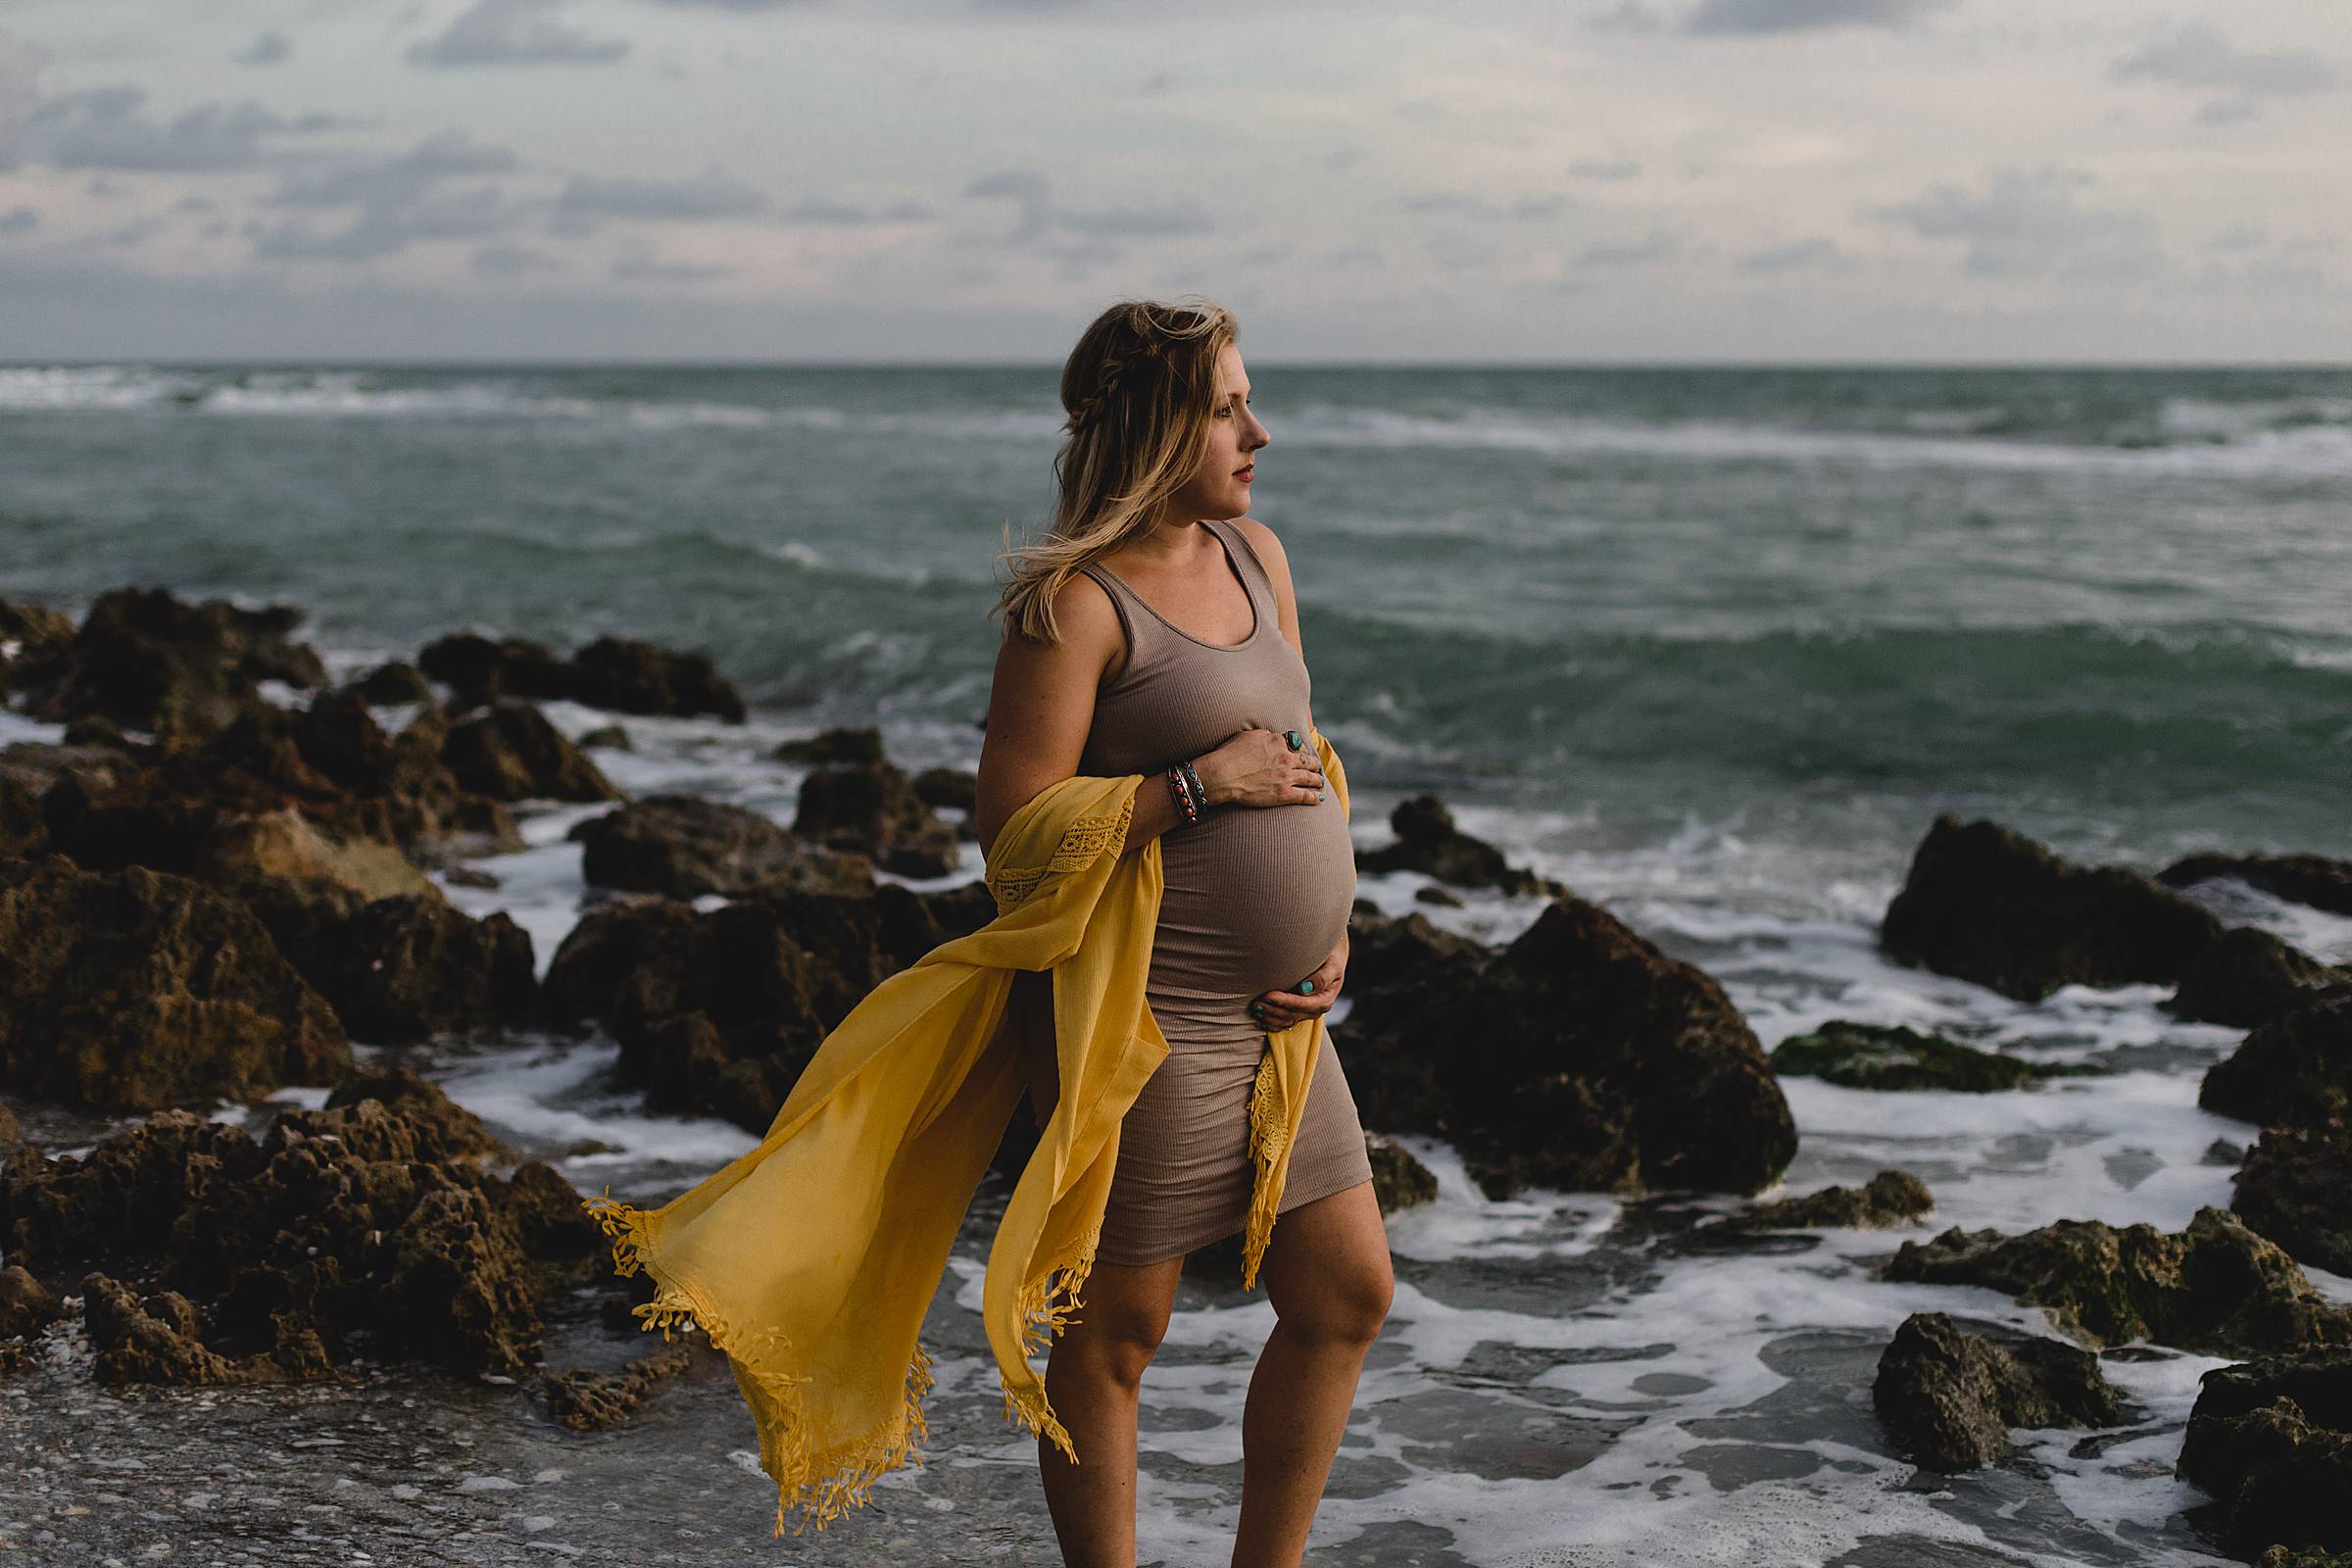 Maternity session with girl on beach with rocks,Maternity session in venice fl, caspersen beach maternity session, photographer in sarasota fl, juiana montane photography